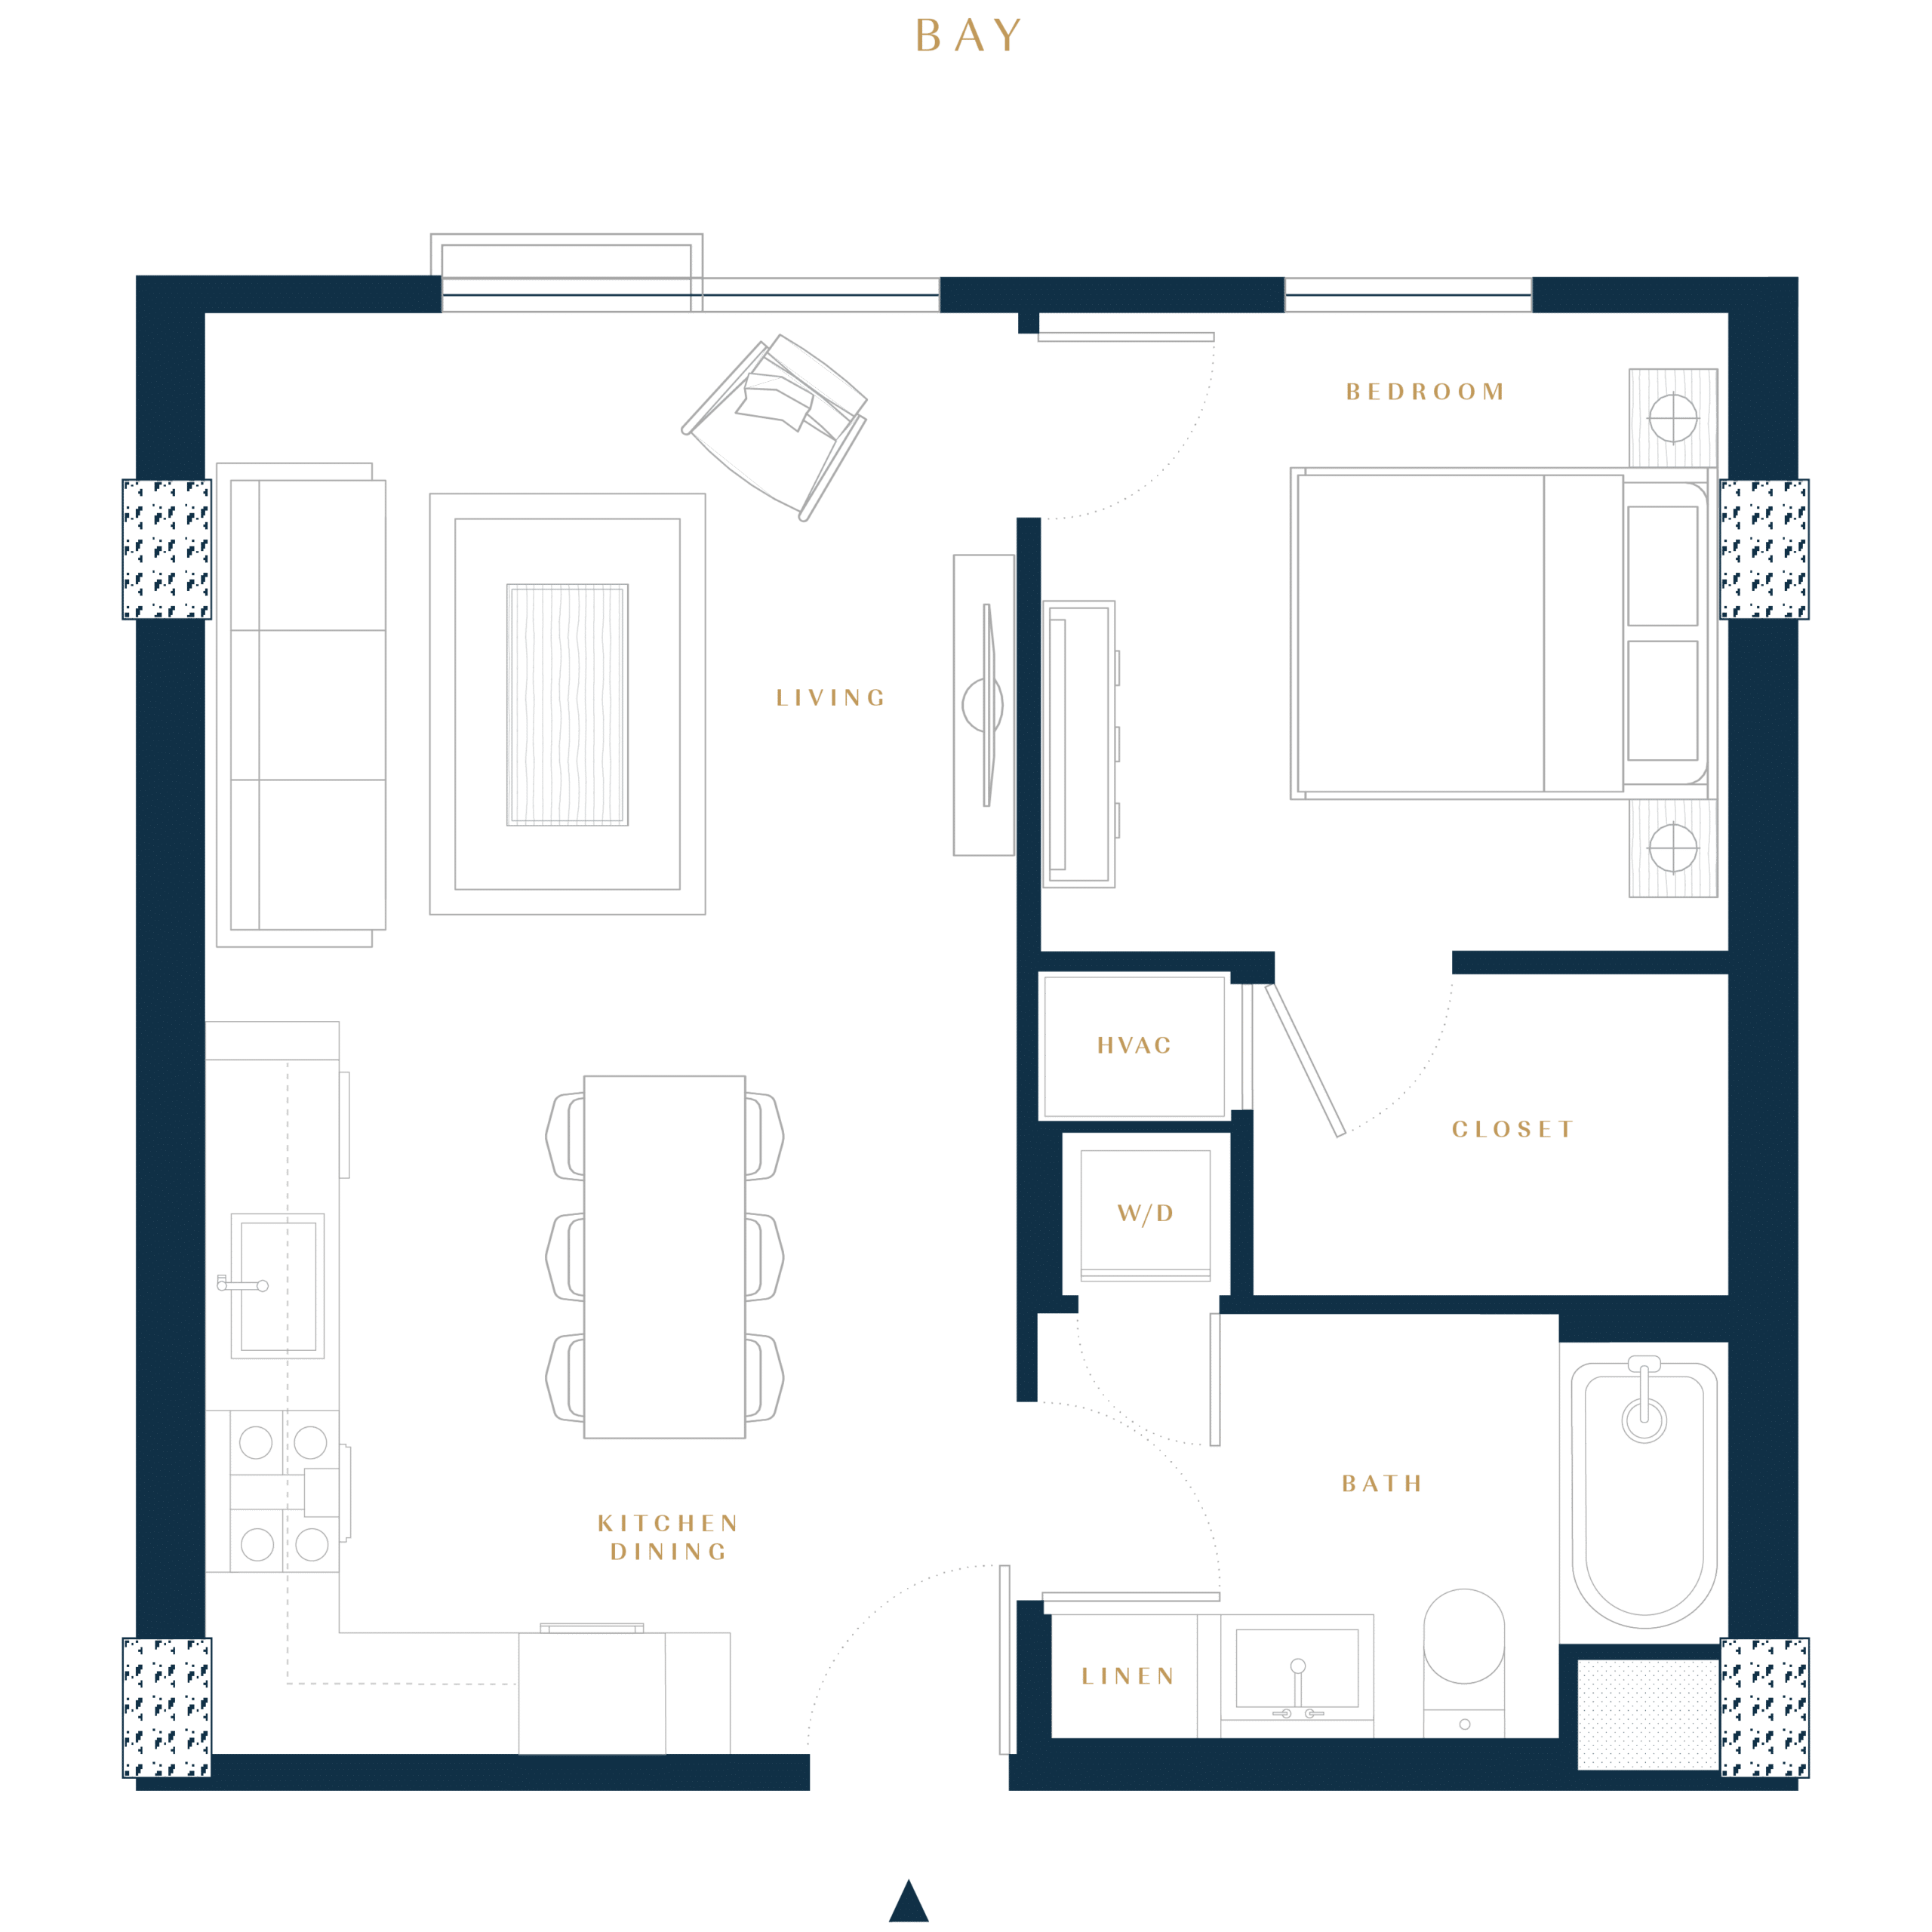 Residence 1B luxury condo floor plan in San Francisco Dogpatch